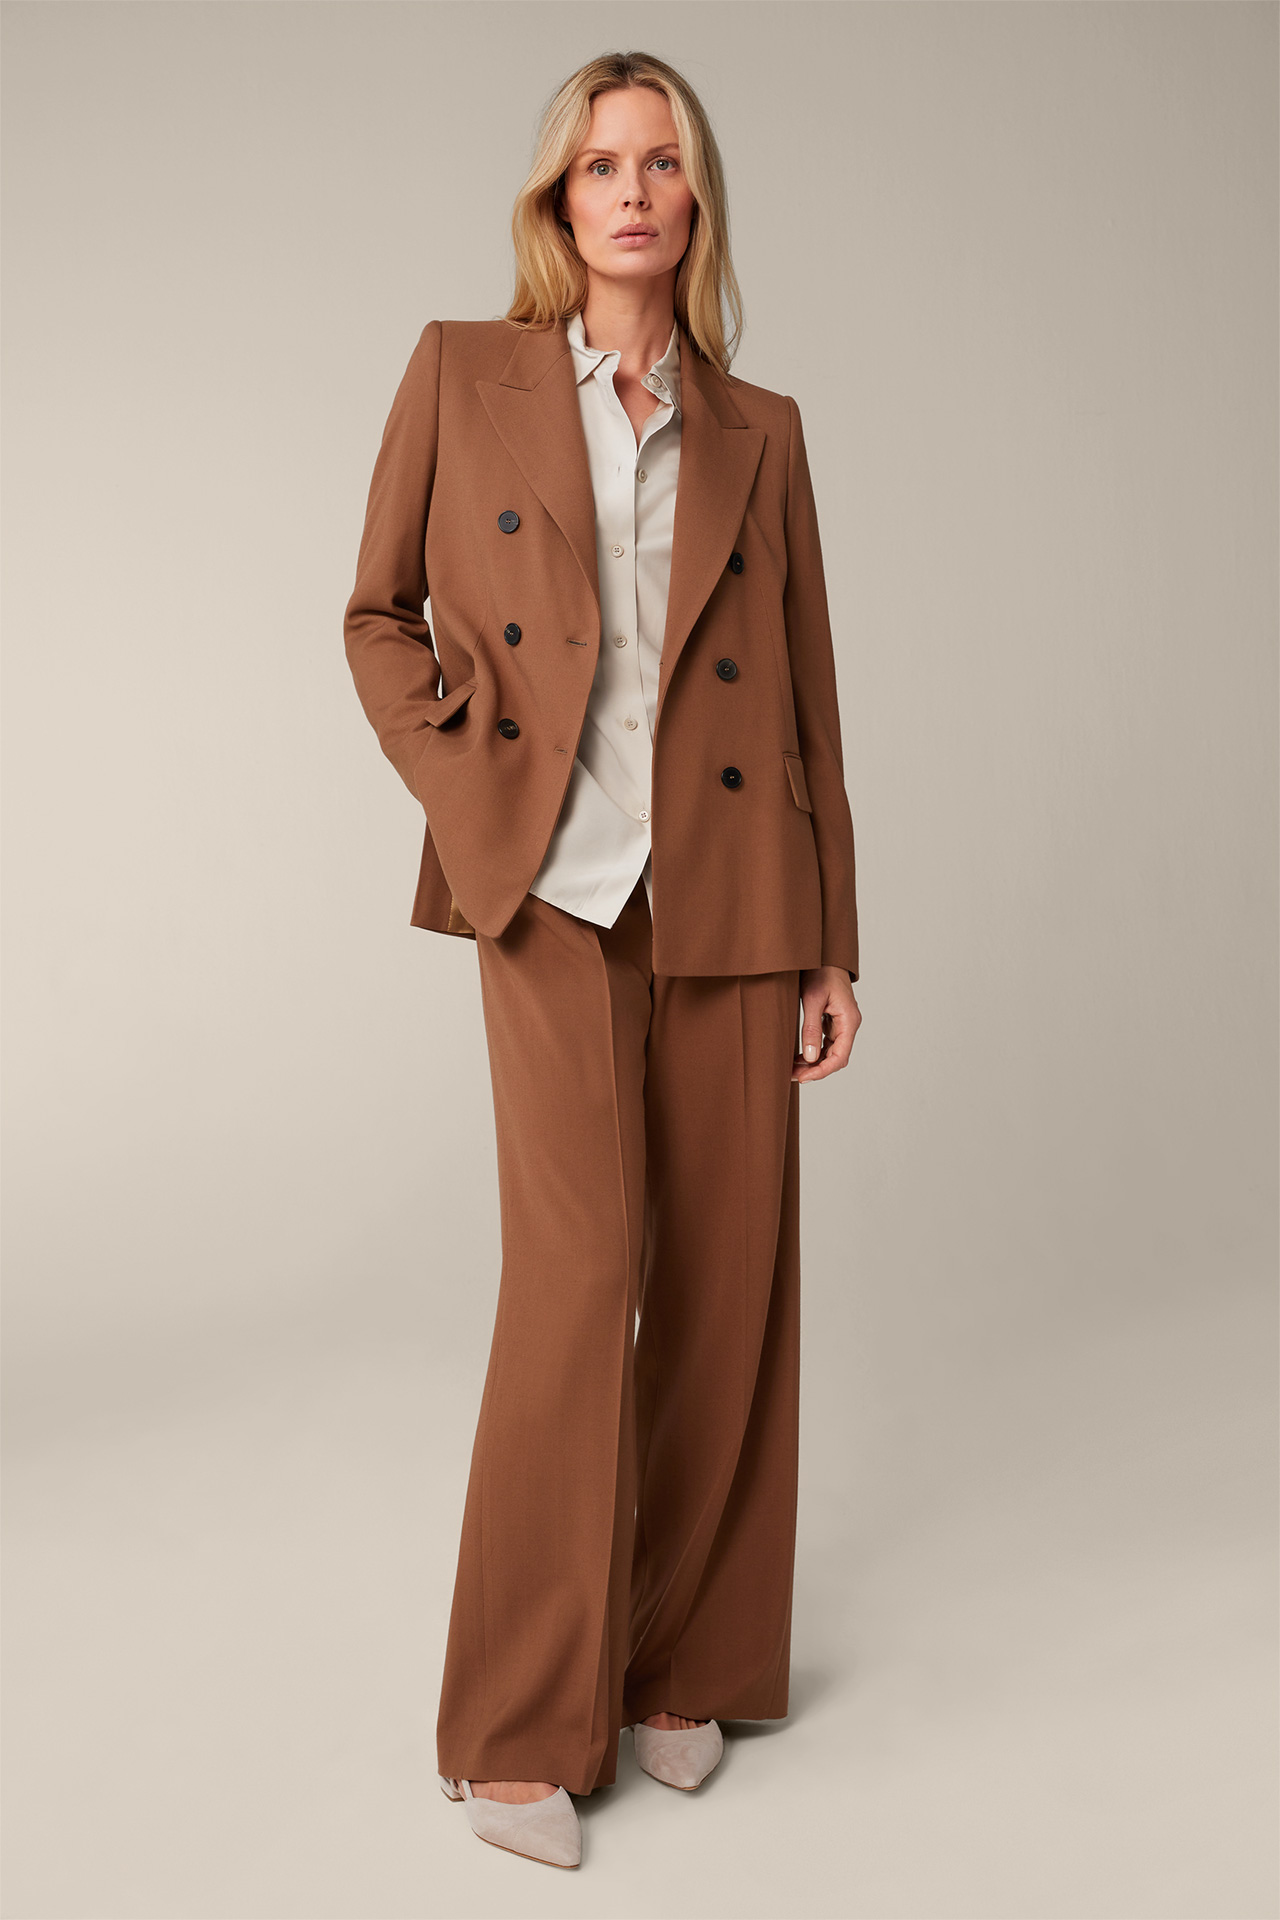 Marlene Trousers with Viscose and Wool in Caramel